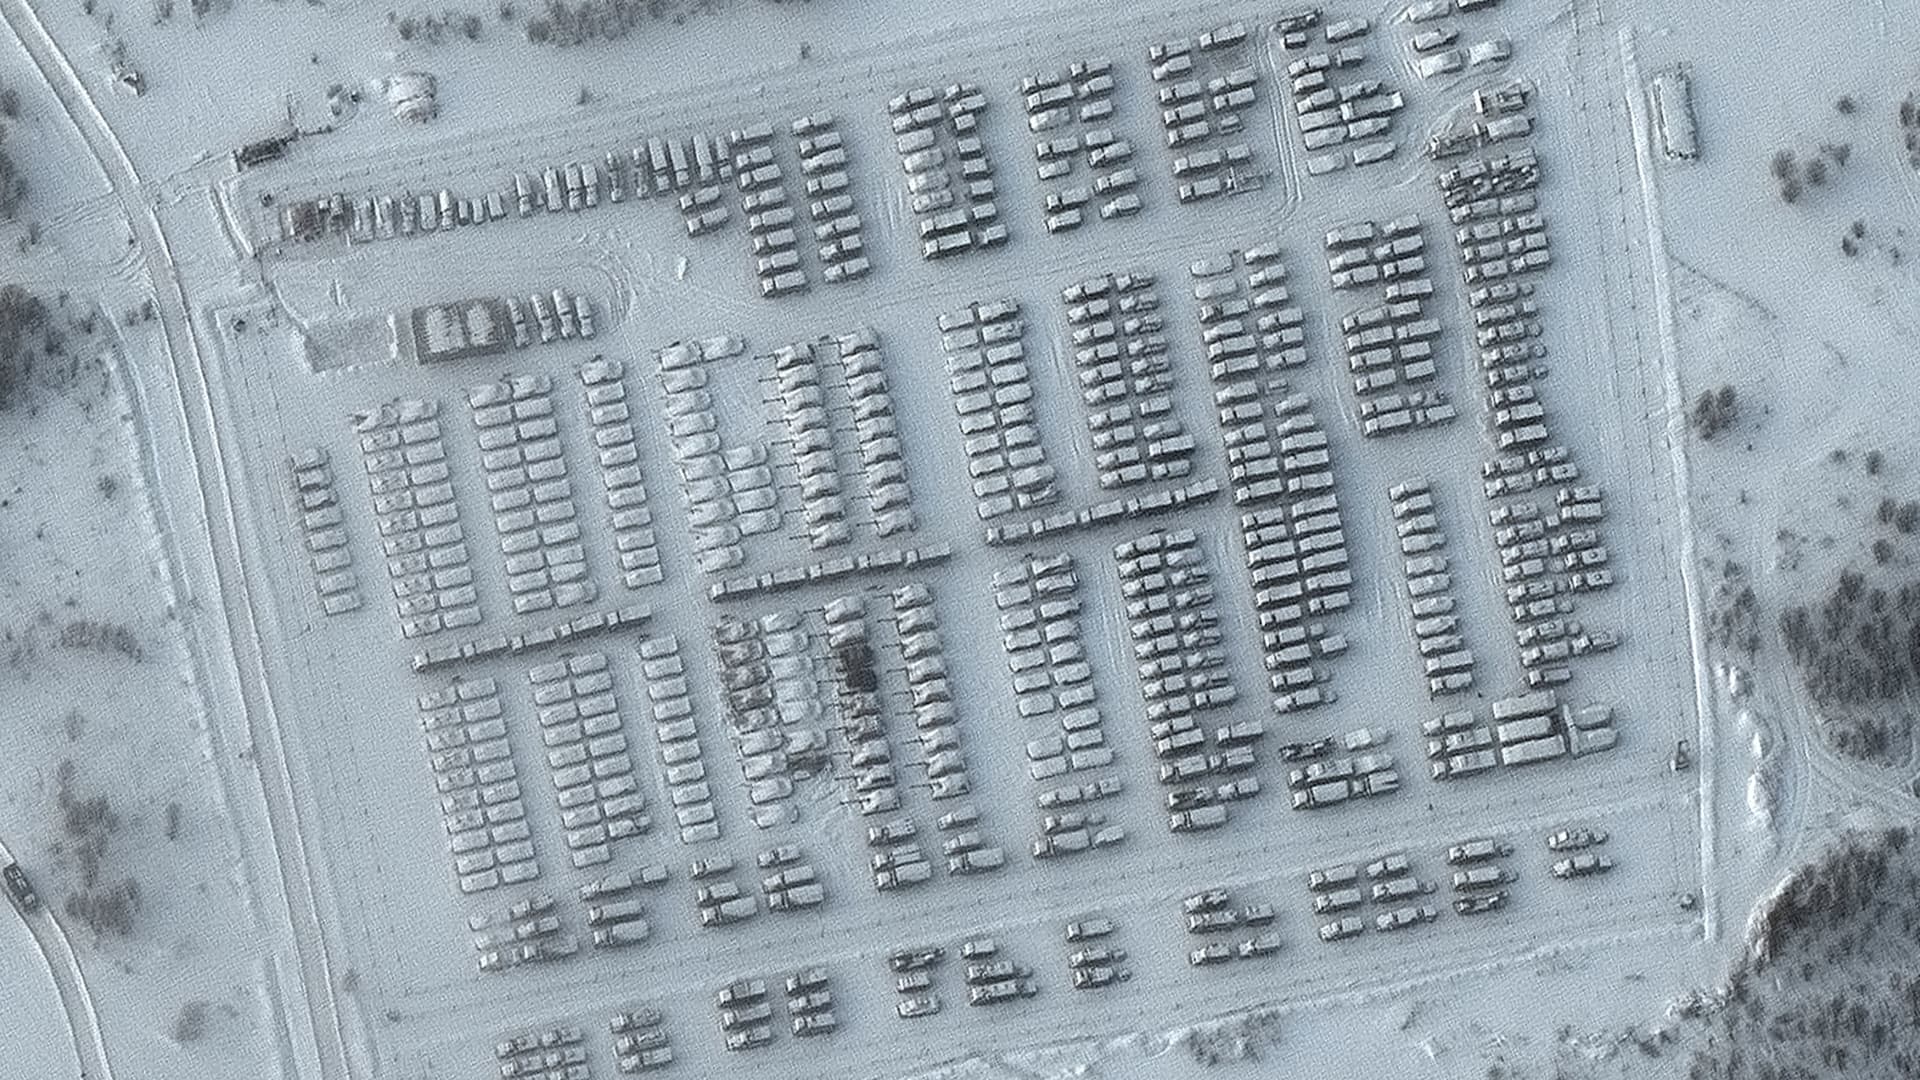 A satellite image shows Russian battle groups and vehicles parked in Yelnya, Russia January 19, 2022.